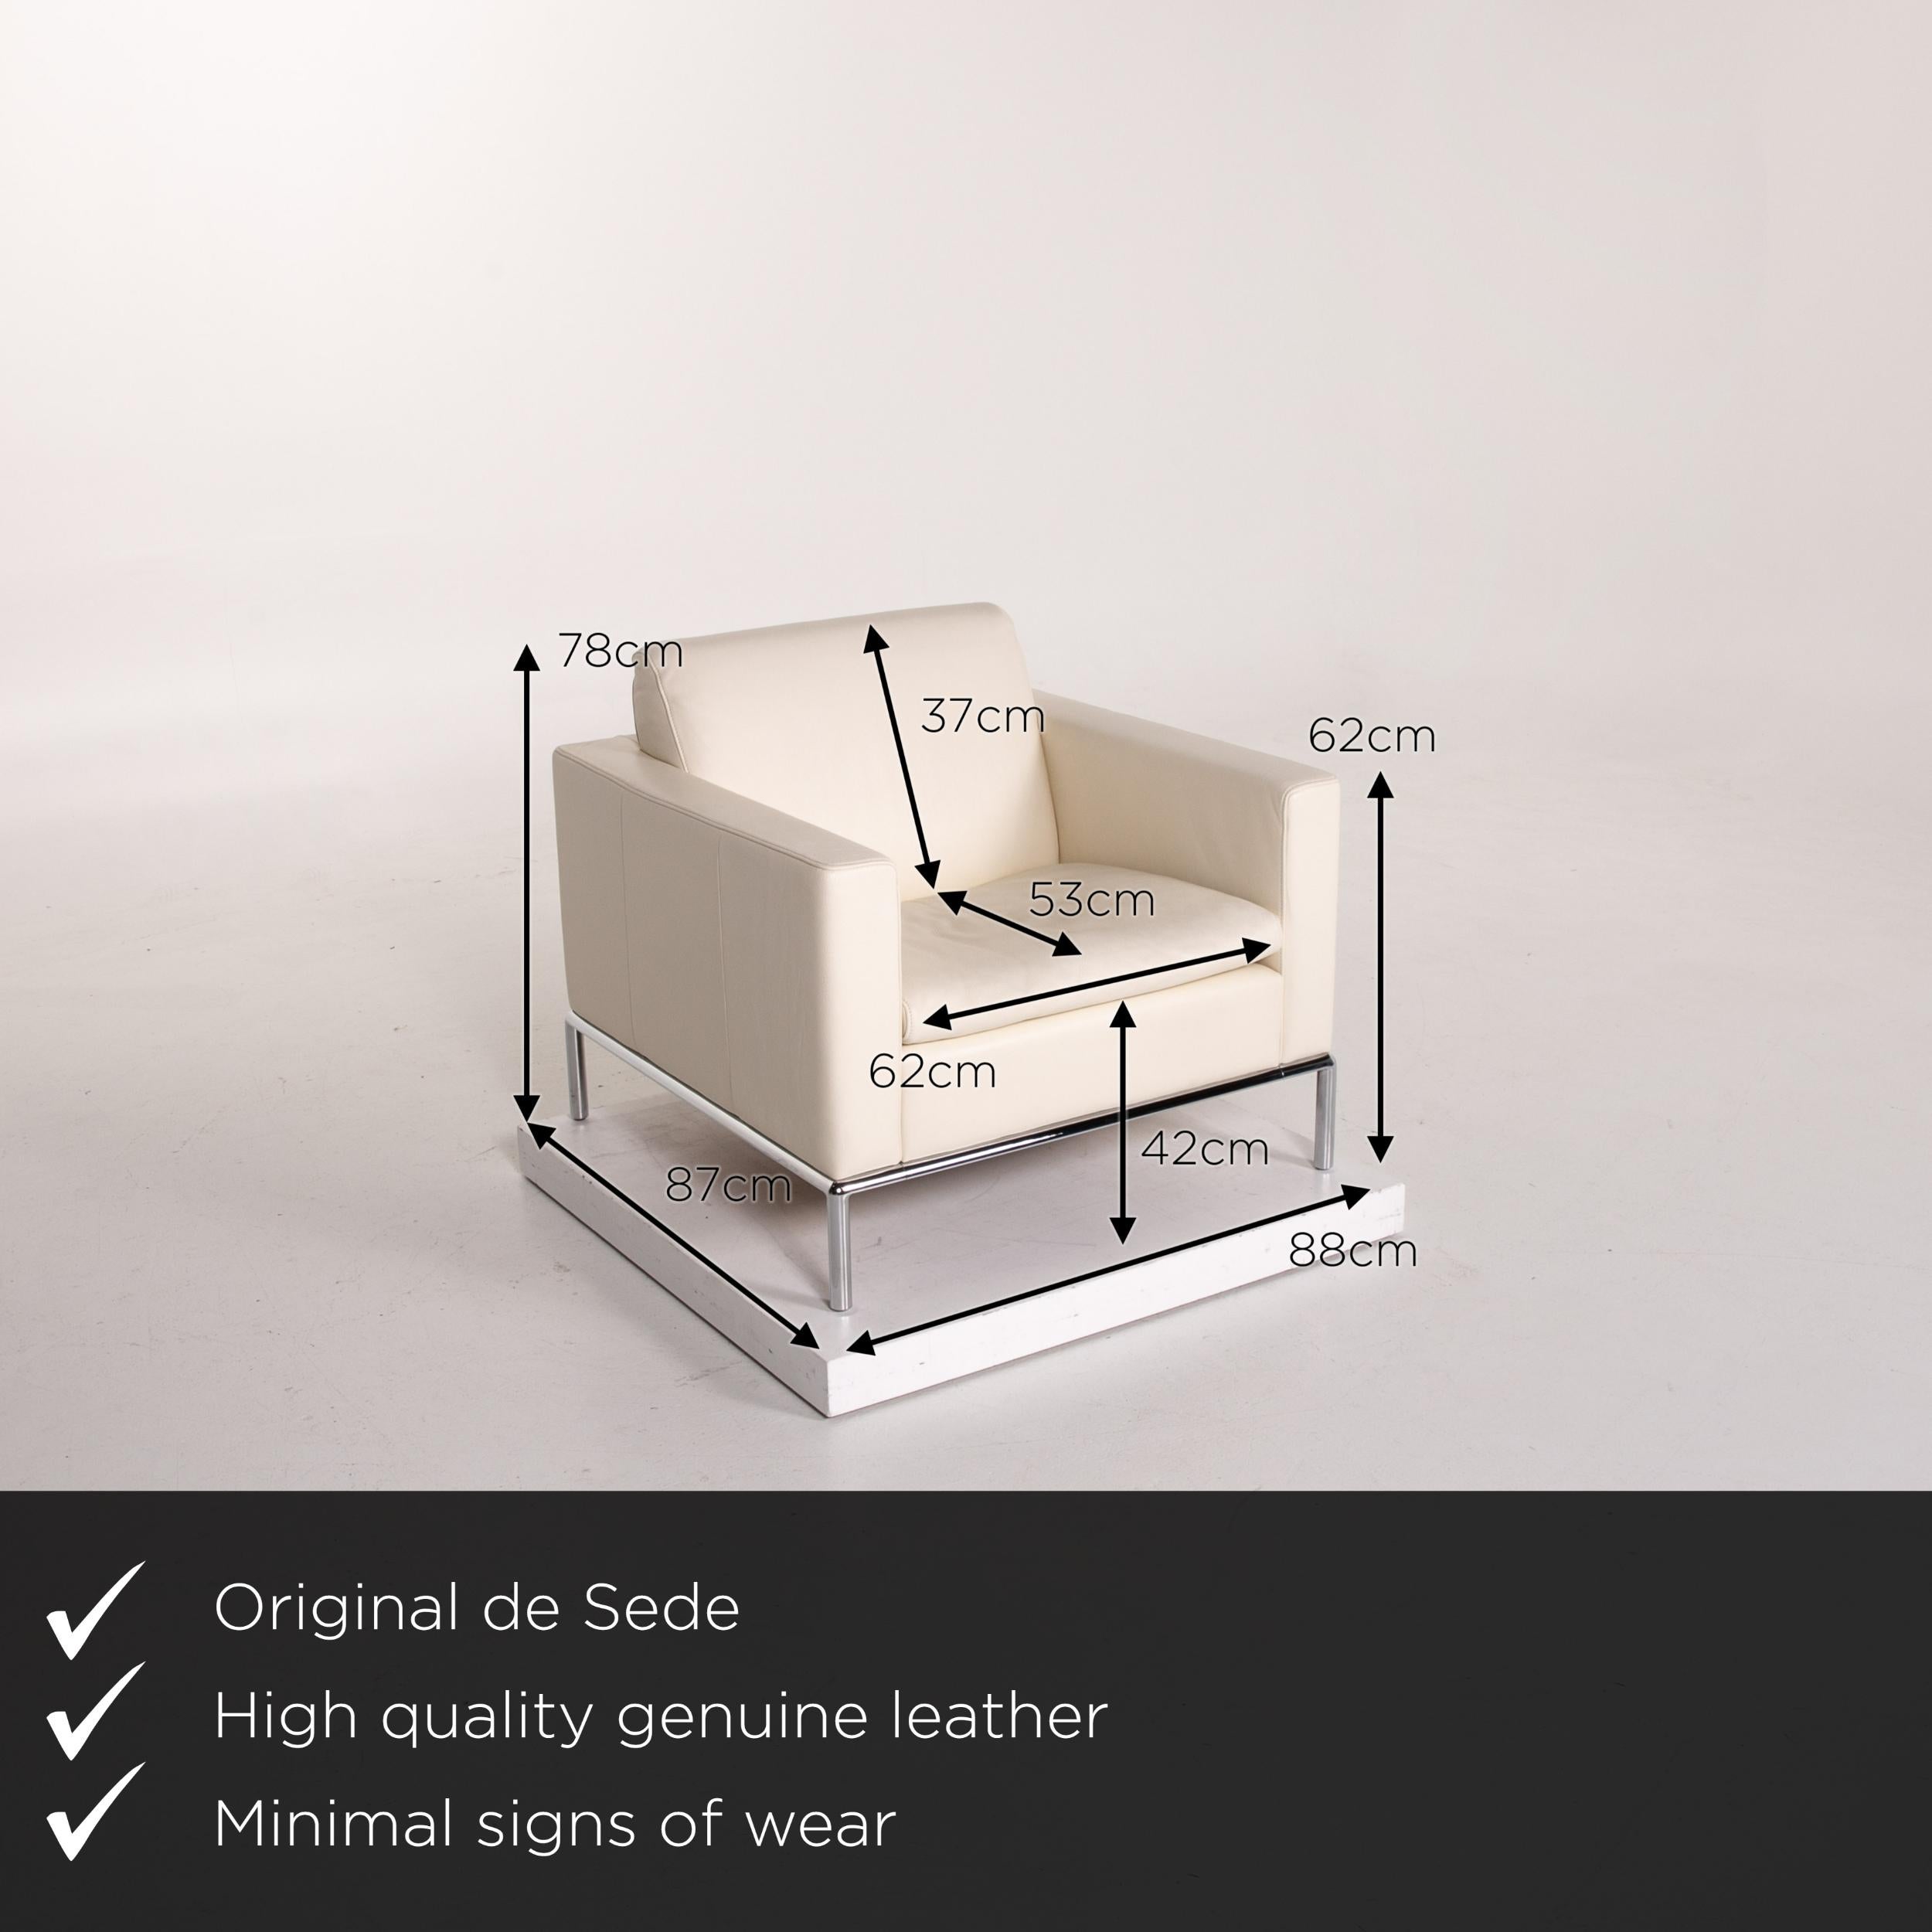 We present to you a De Sede DS 5 leather armchair cream.
 

 Product measurements in centimeters:
 

Depth 87
Width 88
Height 78
Seat height 42
Rest height 62
Seat depth 53
Seat width 62
Back height 37.
 